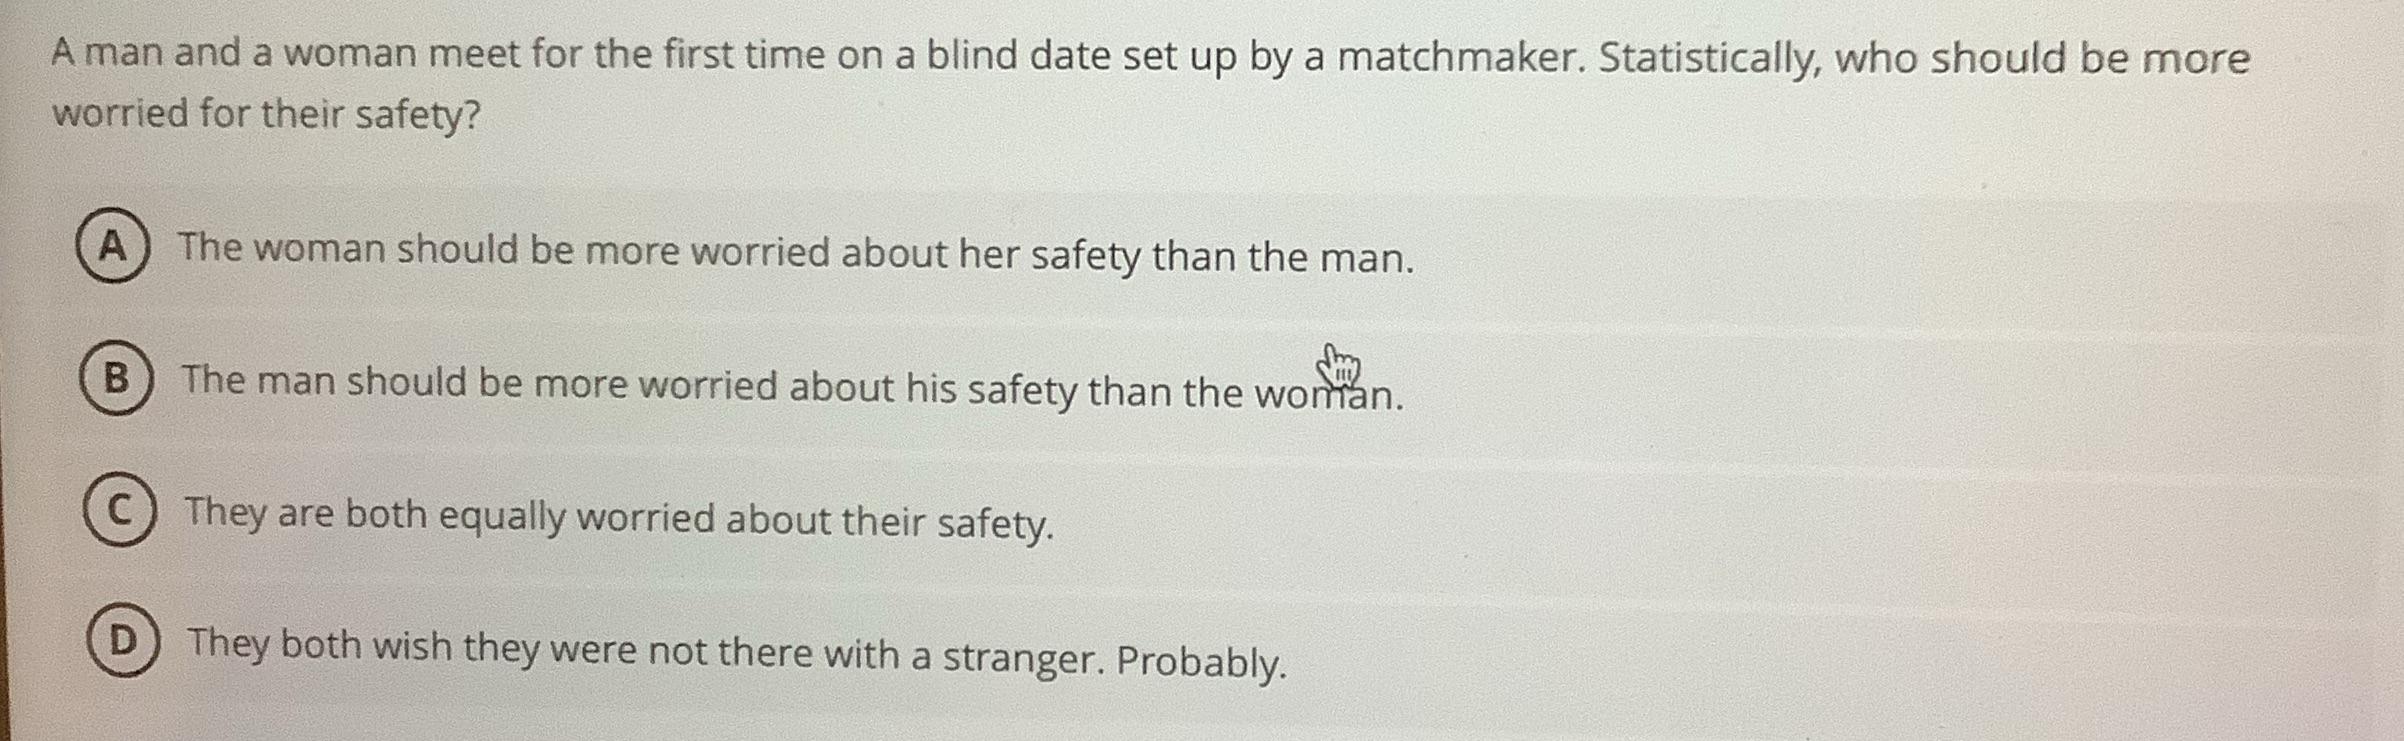 A man and a woman meet for the first time on a blind date set up by a matchmaker. Statistically, who should